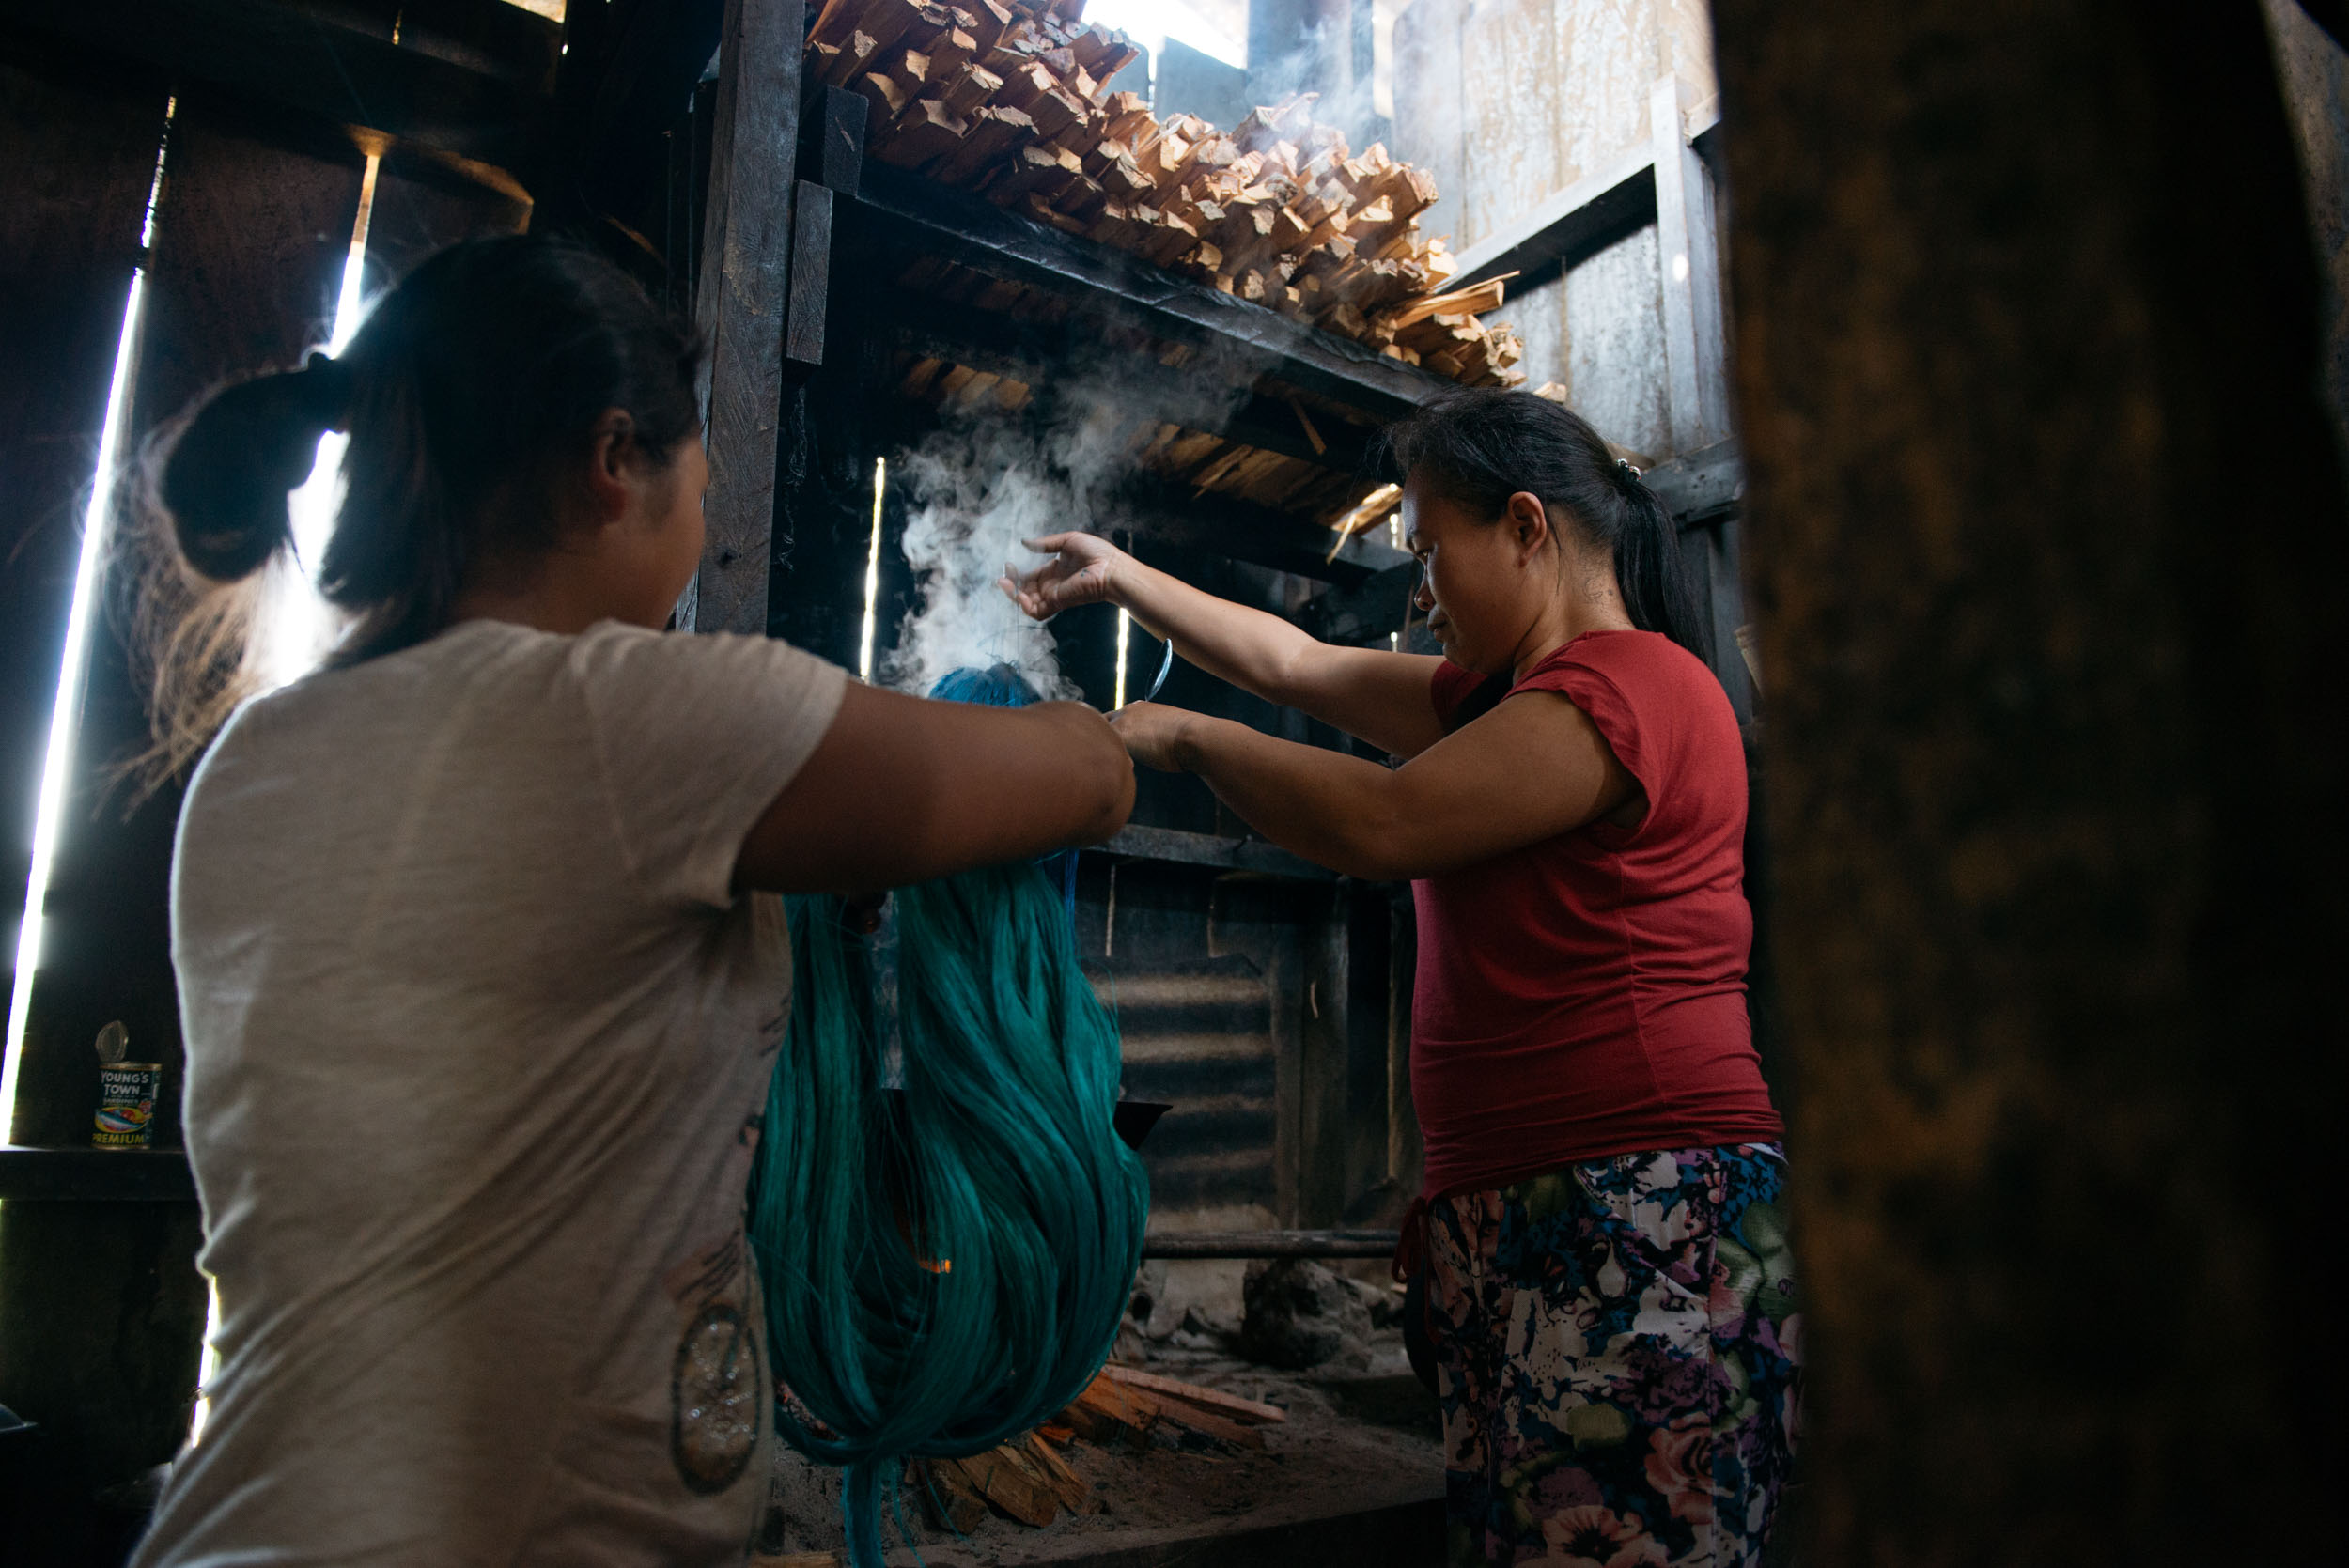  The Higaonons’ of Barangay Manalog still practice the traditional process of Hinabol weaving except for one, dyeing. From natural dyes which came fresh from the Lumads’ ancestral lands, turmeric for yellow,&nbsp; tungog&nbsp; branch for red,&nbsp; b